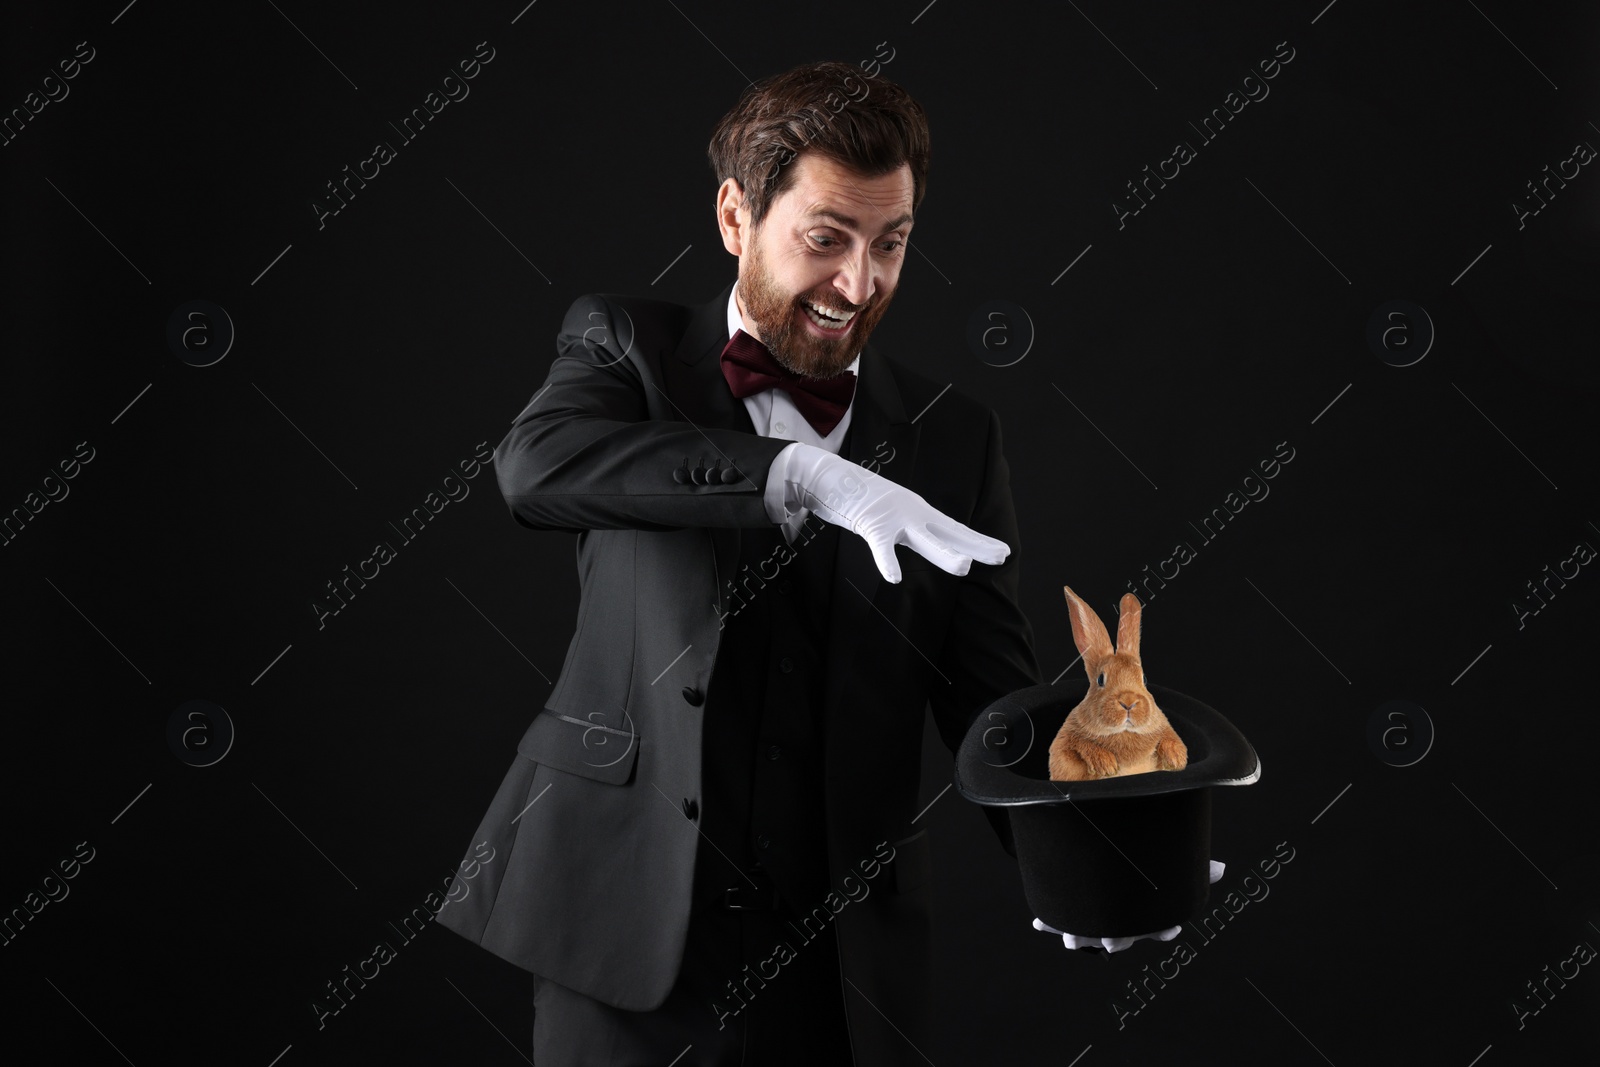 Image of Magician showing trick with top hat and rabbit on black background